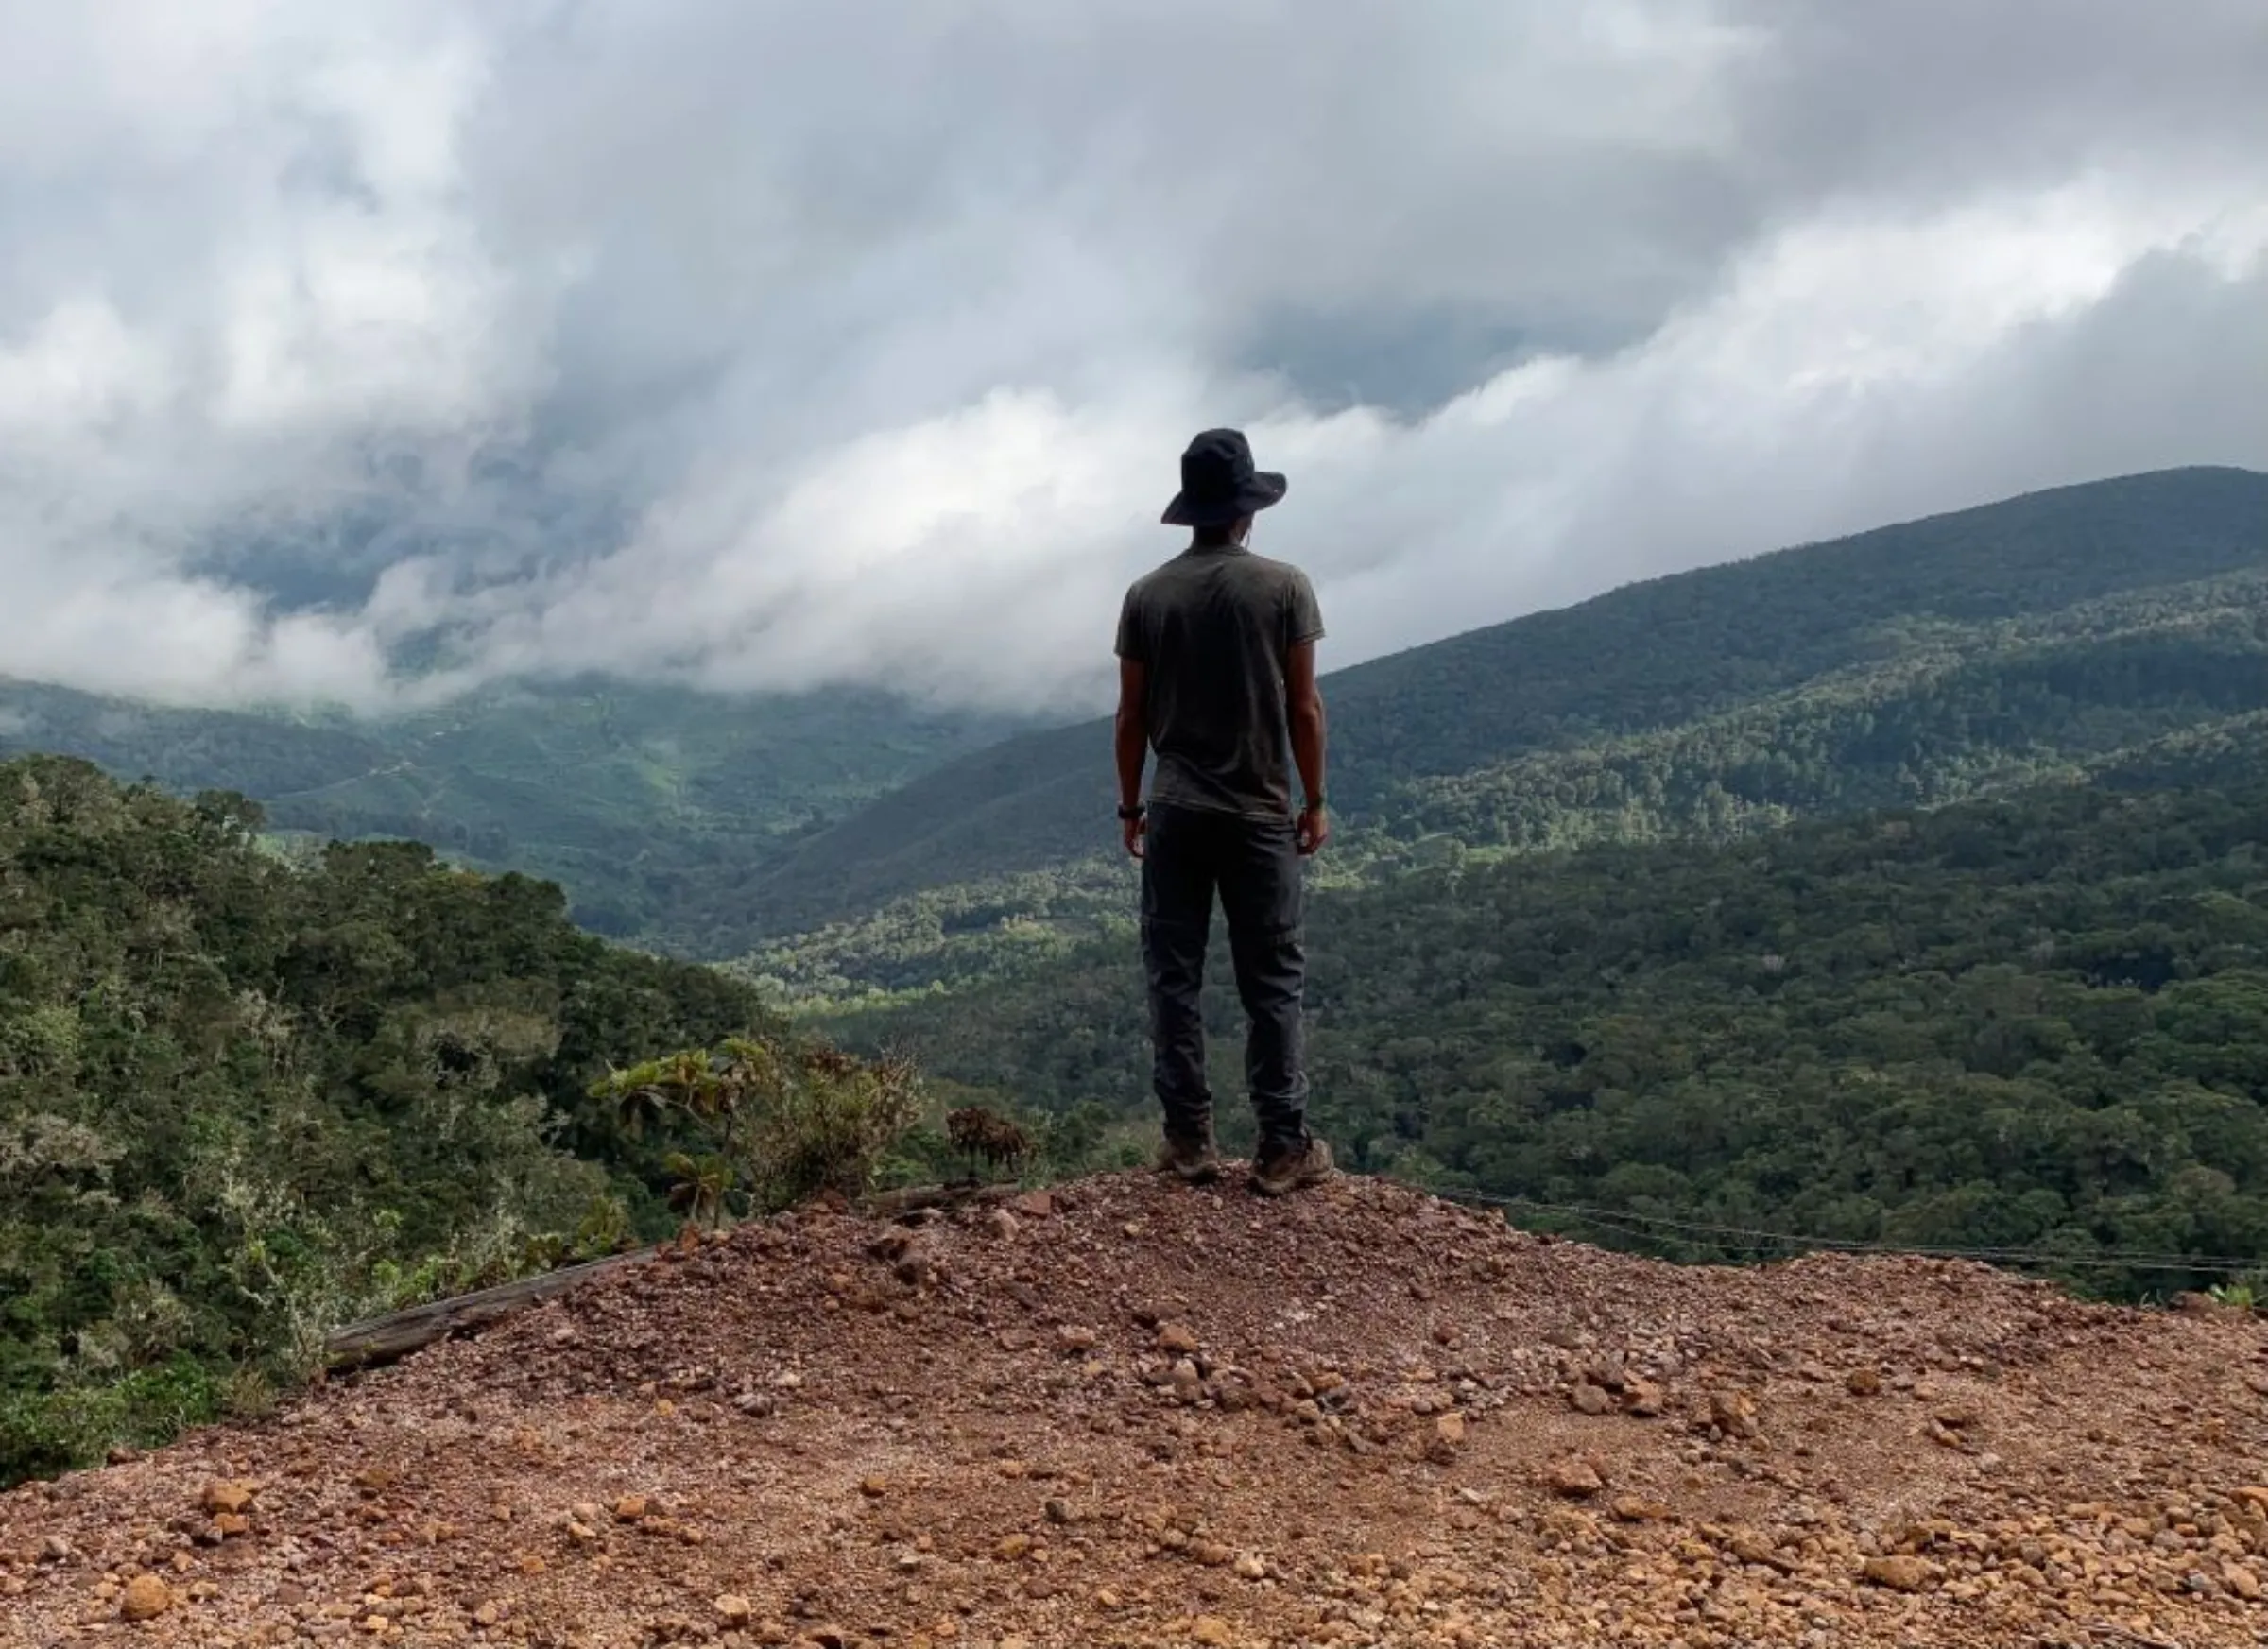 Guide Alejandro Montoya gazes out over the highlands of Central Costa Rica from a backcountry trail, November 12 2022. The trail lies on the 174-mile Camino de Costa Rica footpath, that starts in Barra de Pacuare and finishes in Quepos, on the Pacific